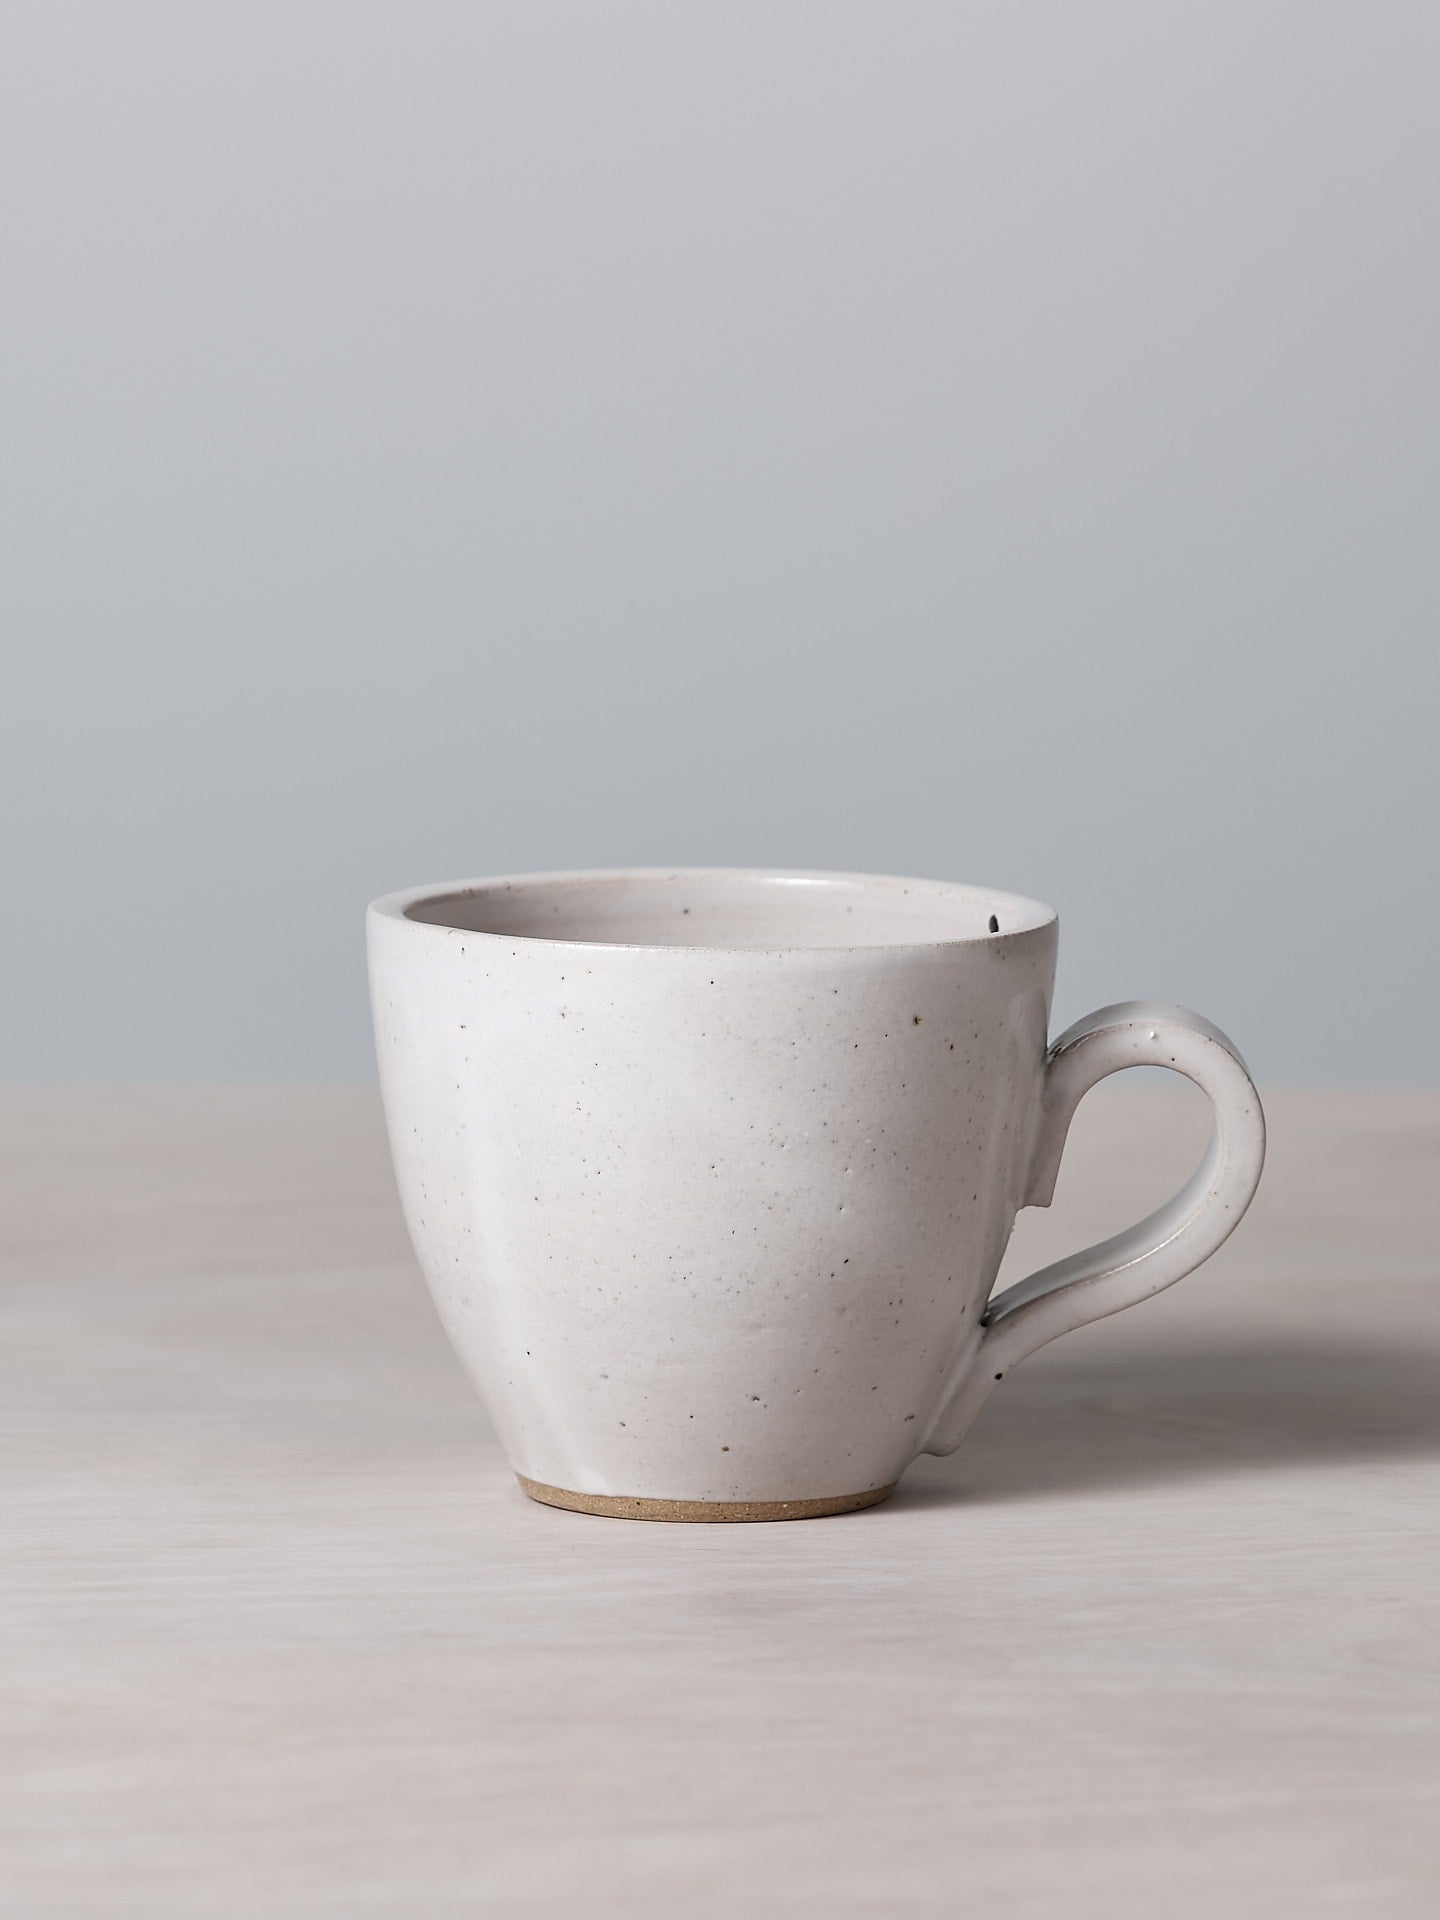 A Richard Beauchamp Tulip Cup – White with a satin glaze sitting on a table